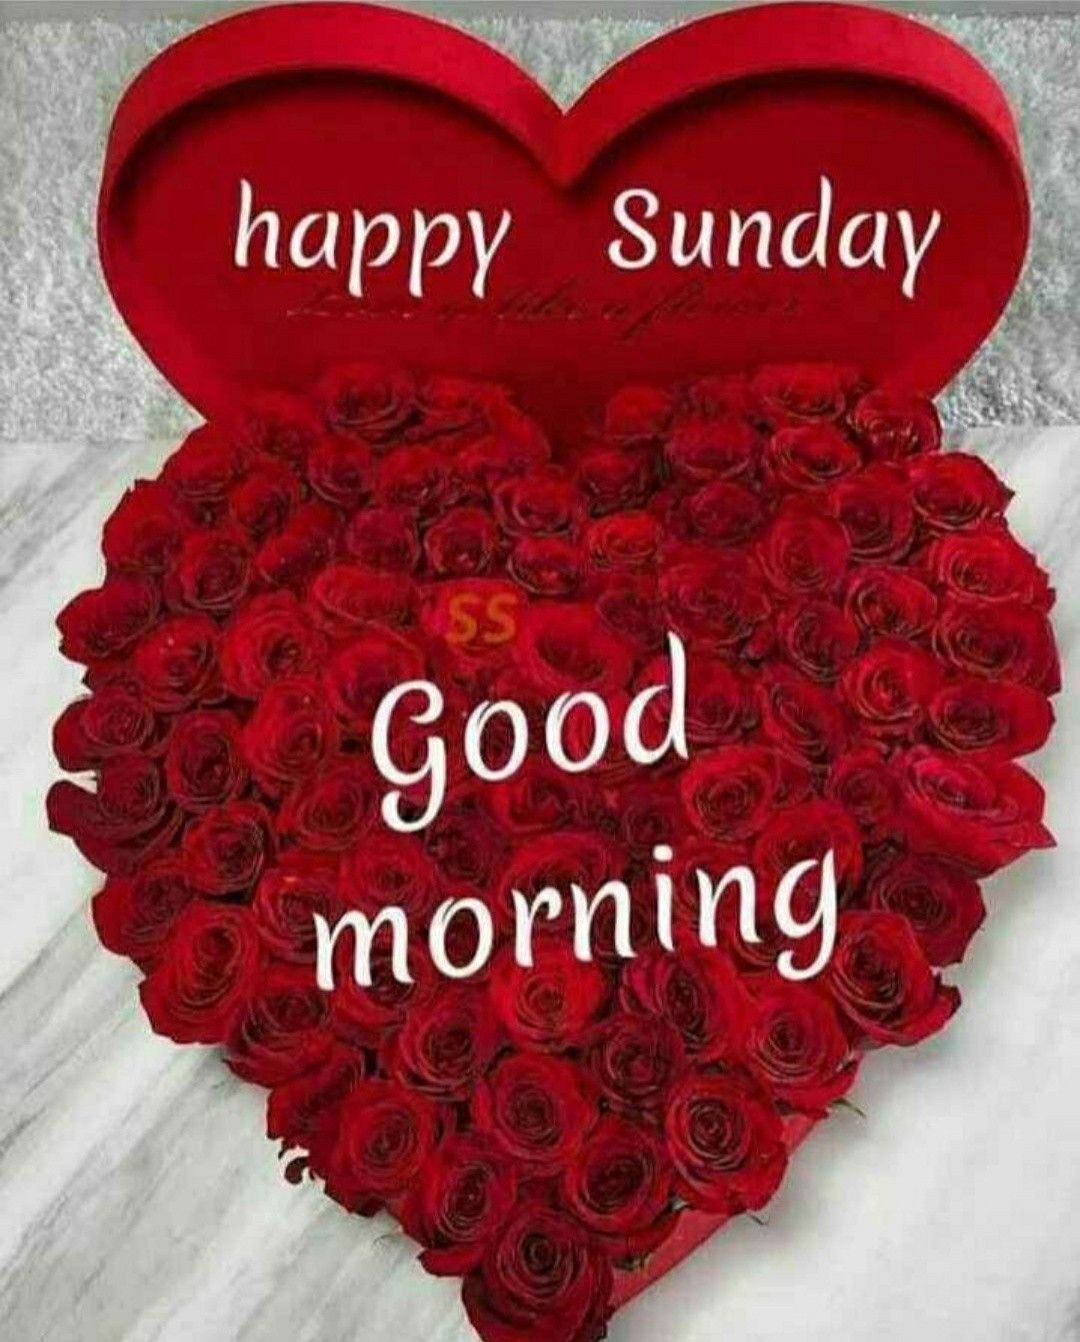 happy sunday images for whatsapp